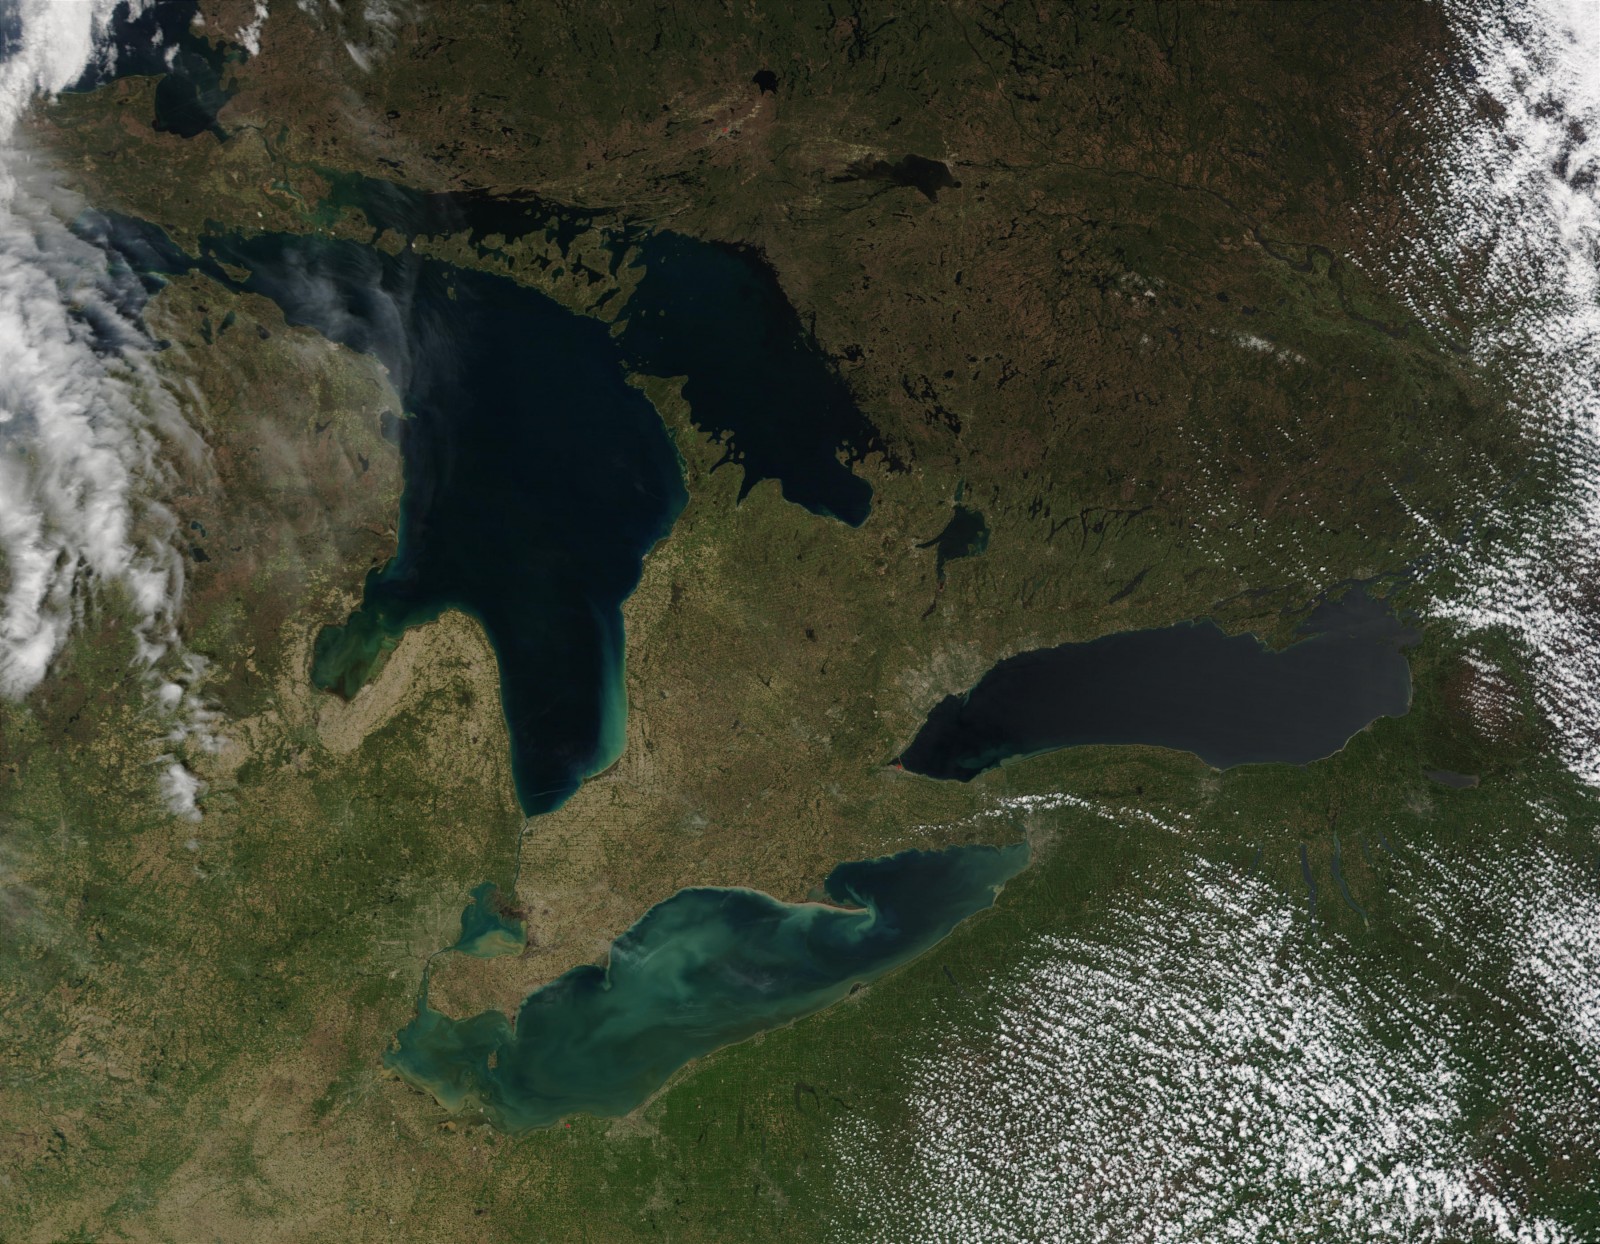 The nine aquaculture facilities in the Ontario waters of Lake Huron are the only fish farms operating in the Great Lakes. Photo courtesy MODIS / NOAA Great Lakes Environmental Research Laboratory via Flickr Creative Commons